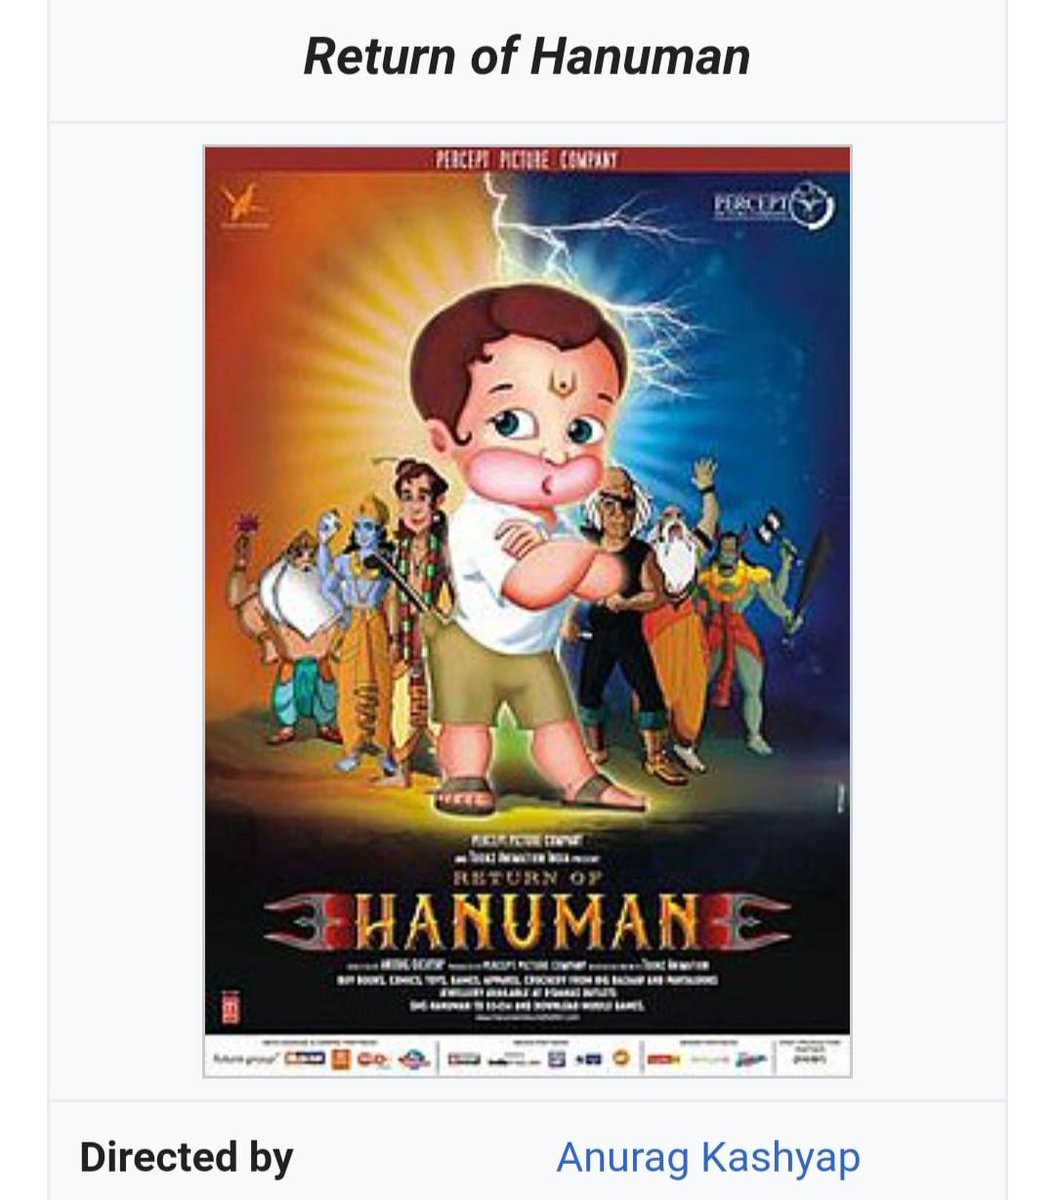 sometimes I'm randomly just chilling and I suddenly remember that Anurag Kashyap directed Return of Hanuman and it has songs by Adnan Sami and Daler Mehndi in it